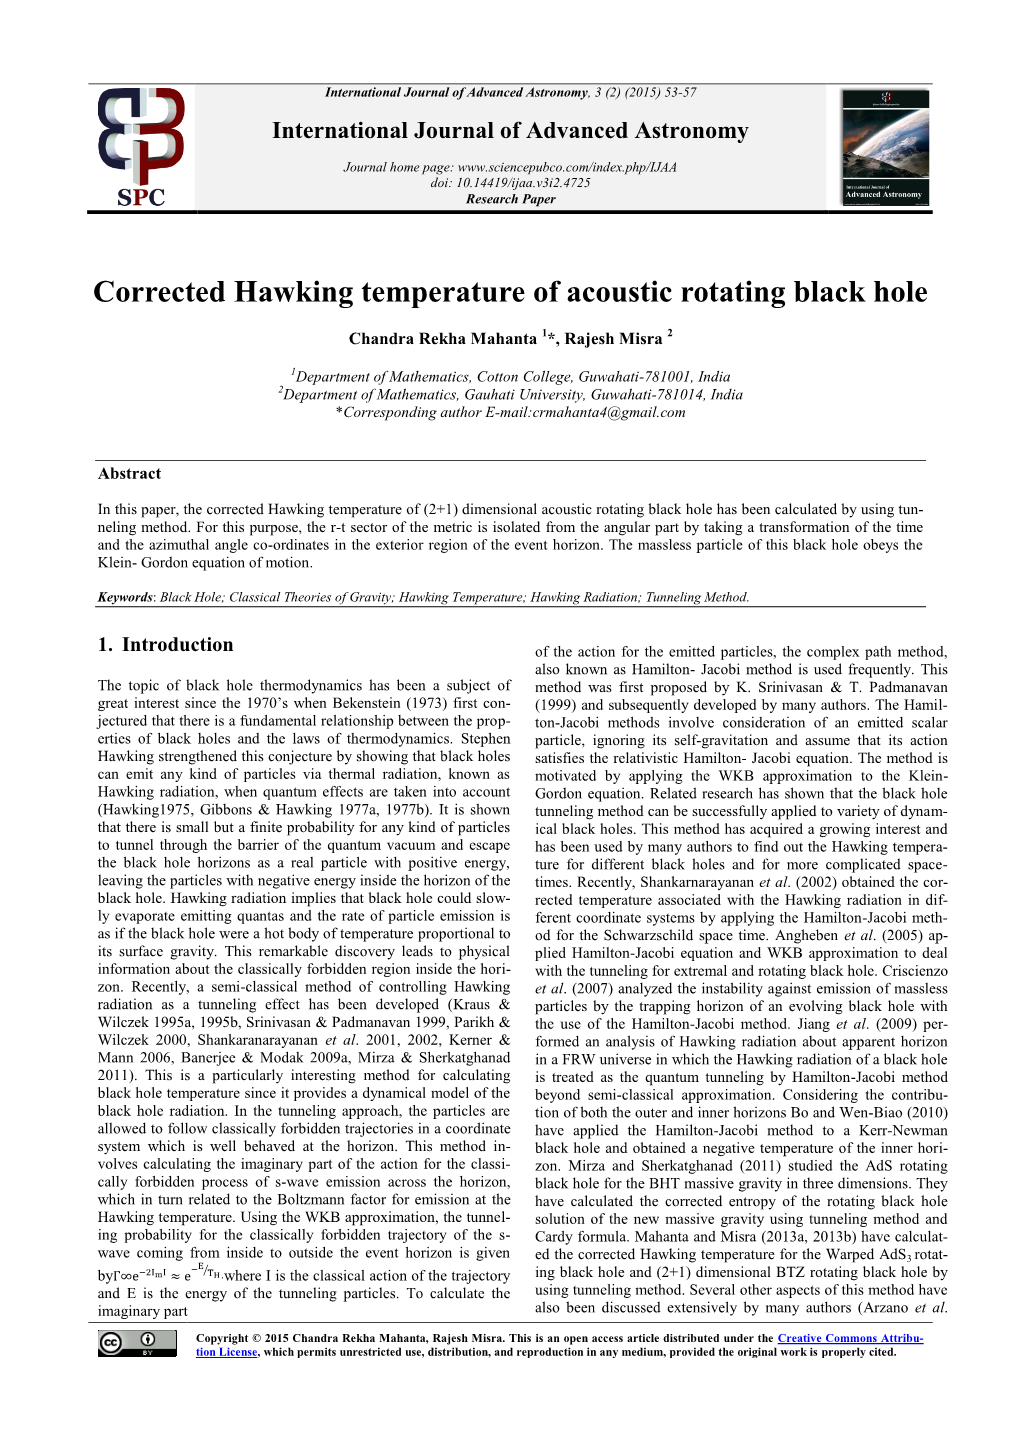 Corrected Hawking Temperature of Acoustic Rotating Black Hole